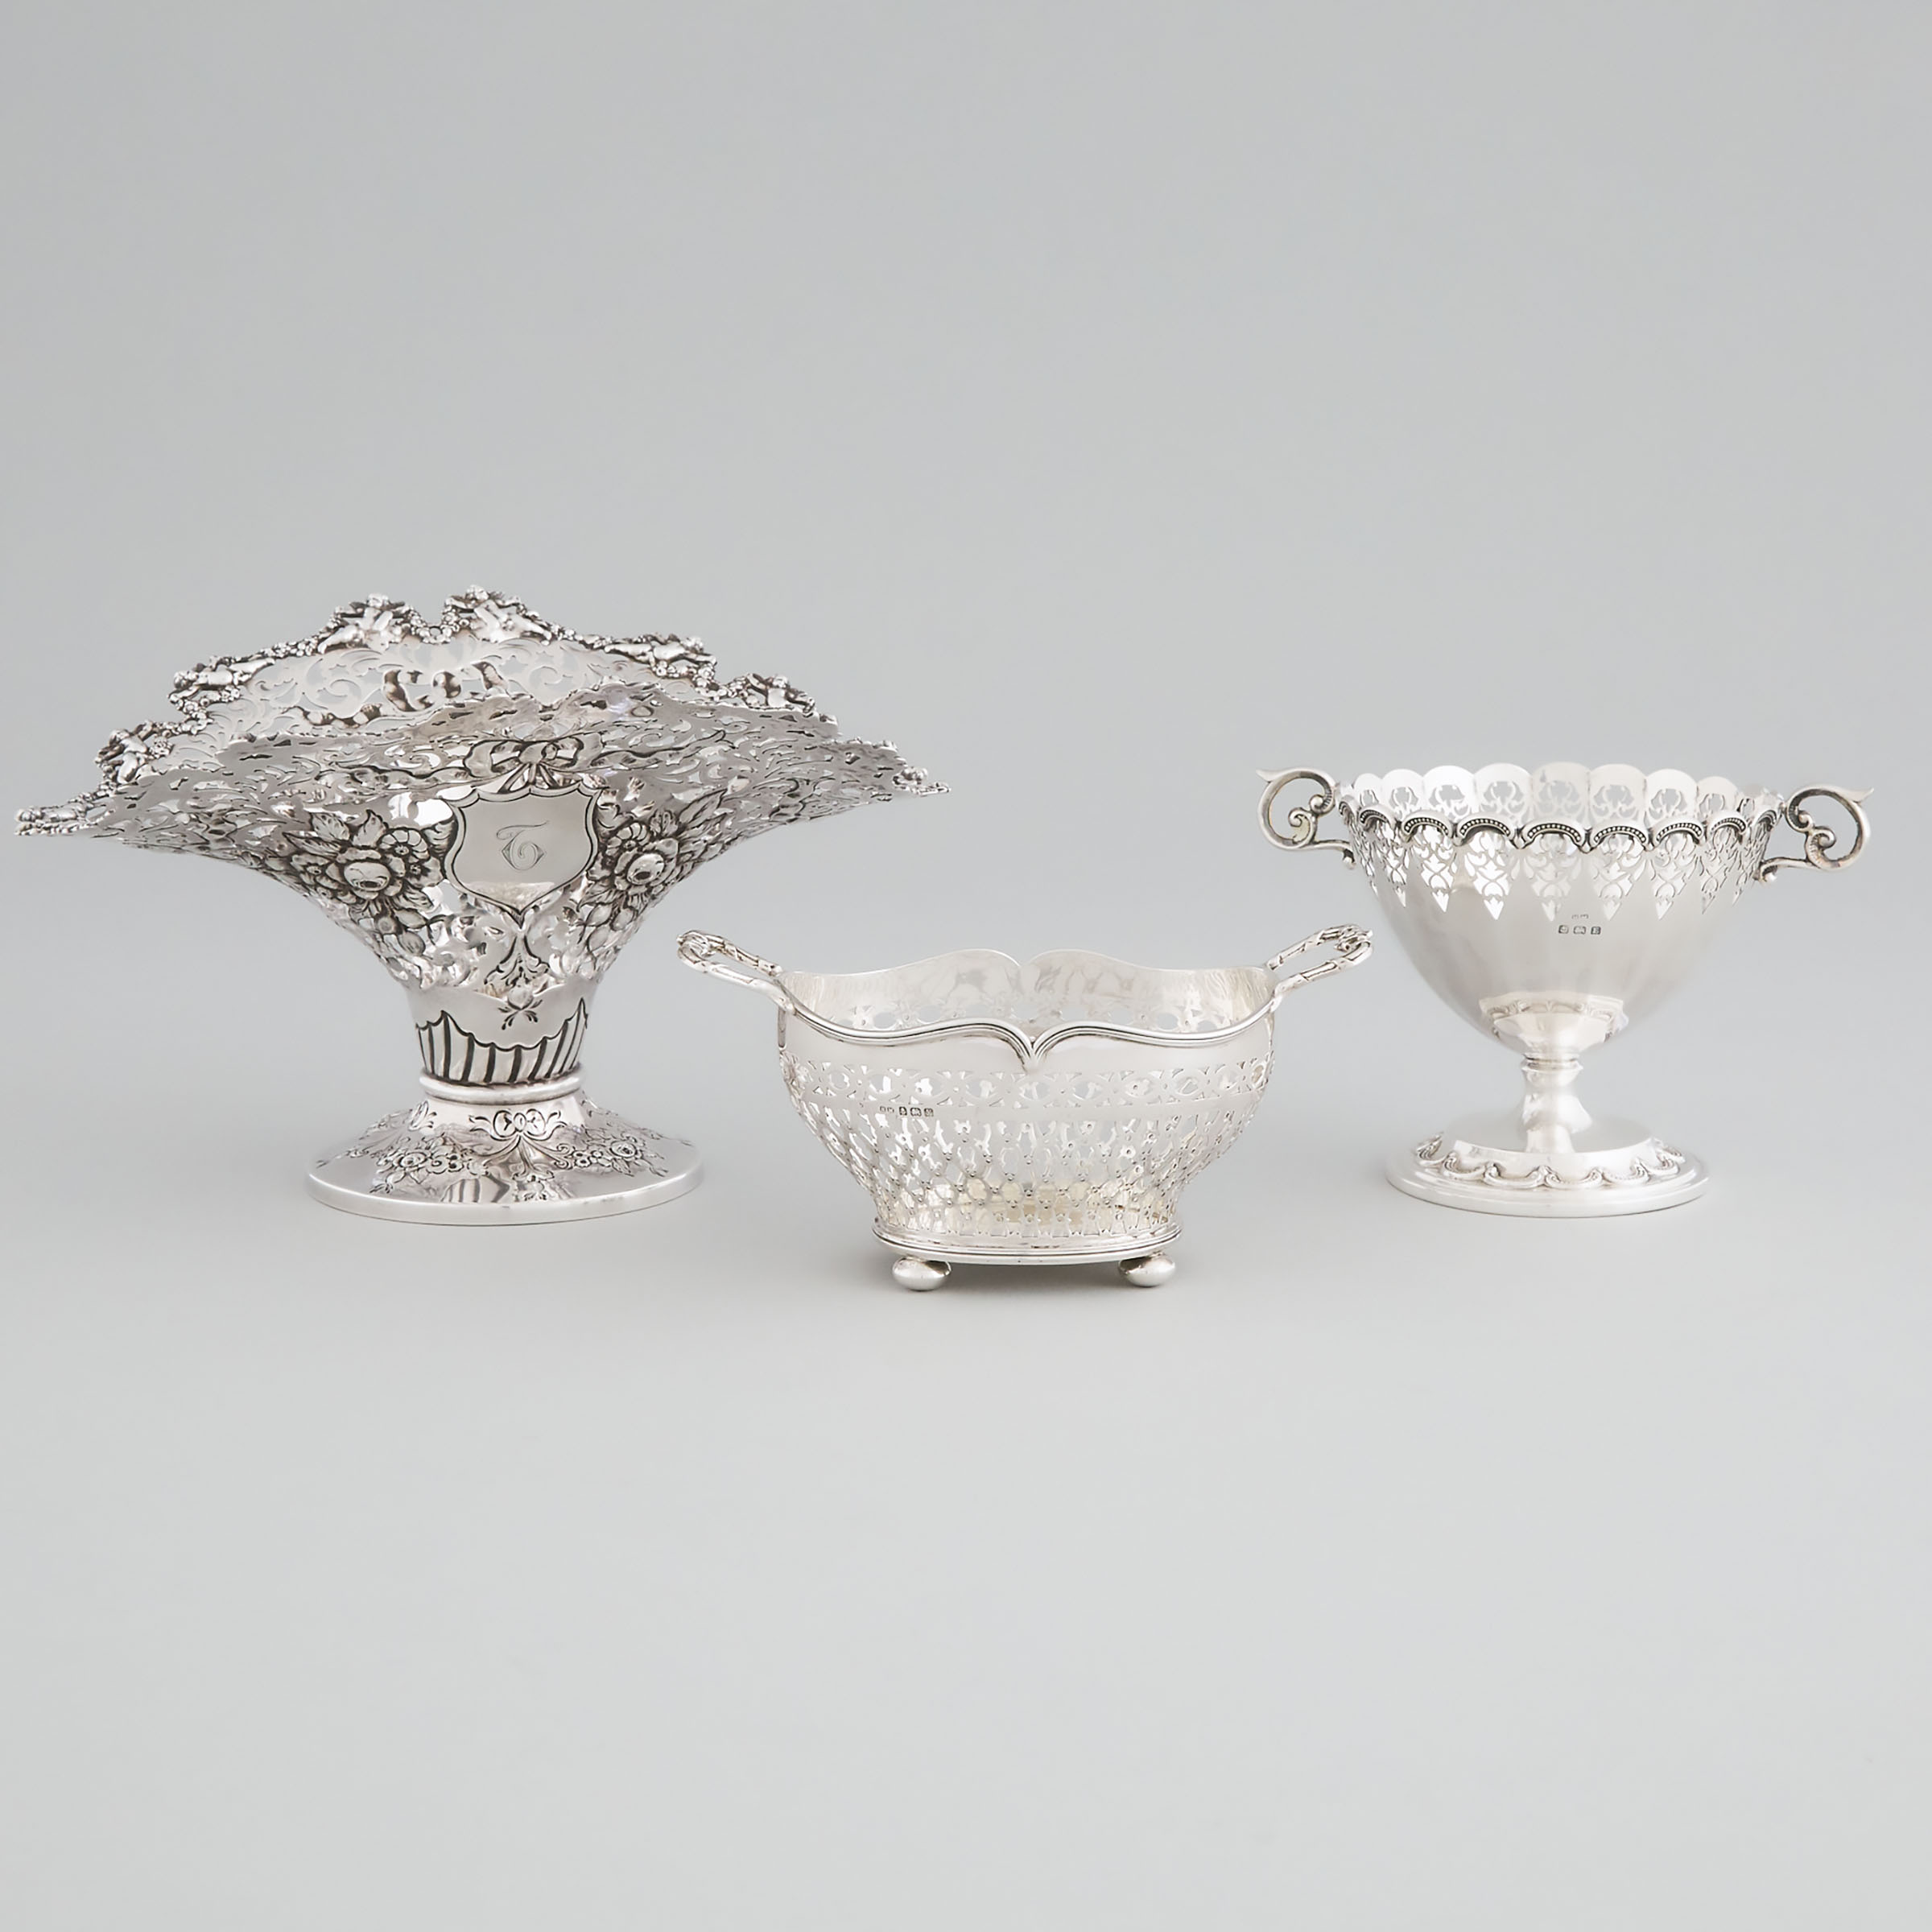 Three Edwardian and Later English Silver Pierced Baskets, George Nathan & Ridley Hayes, Chester, 1904, and Henry Matthews, Birmingham, 1923 and 1929